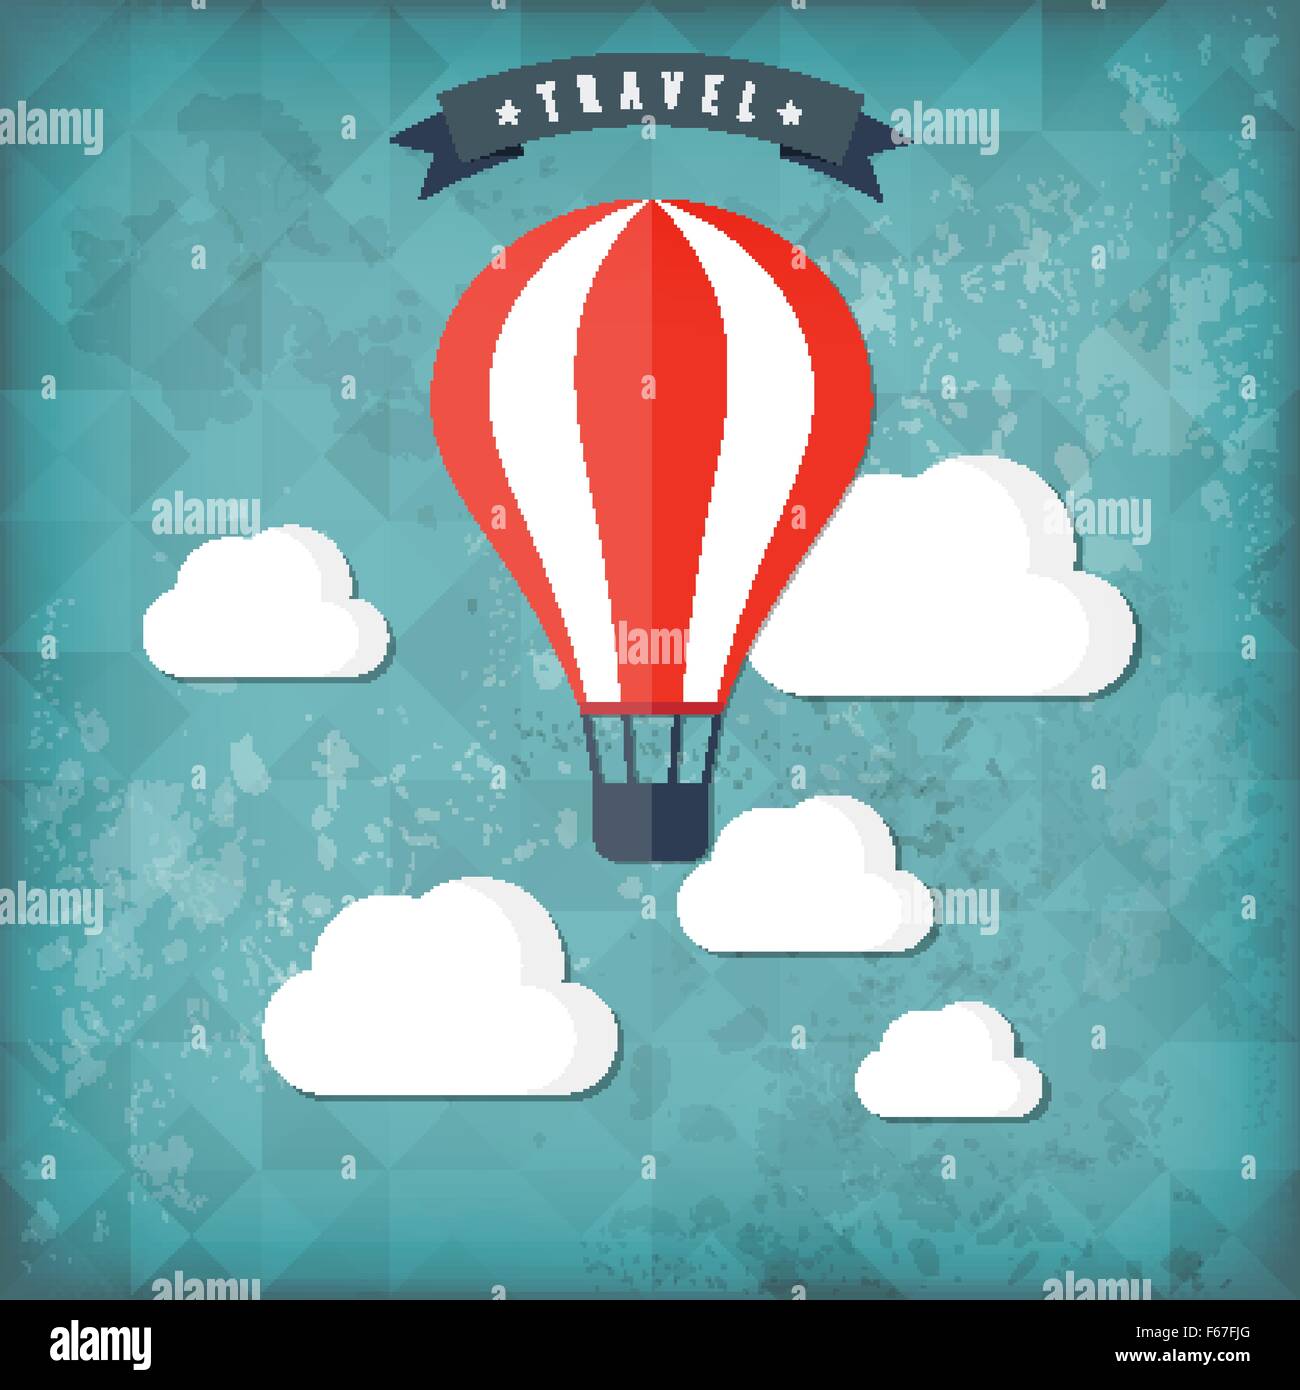 Flat air balloon web icon. Travel vintage background Stock Vector